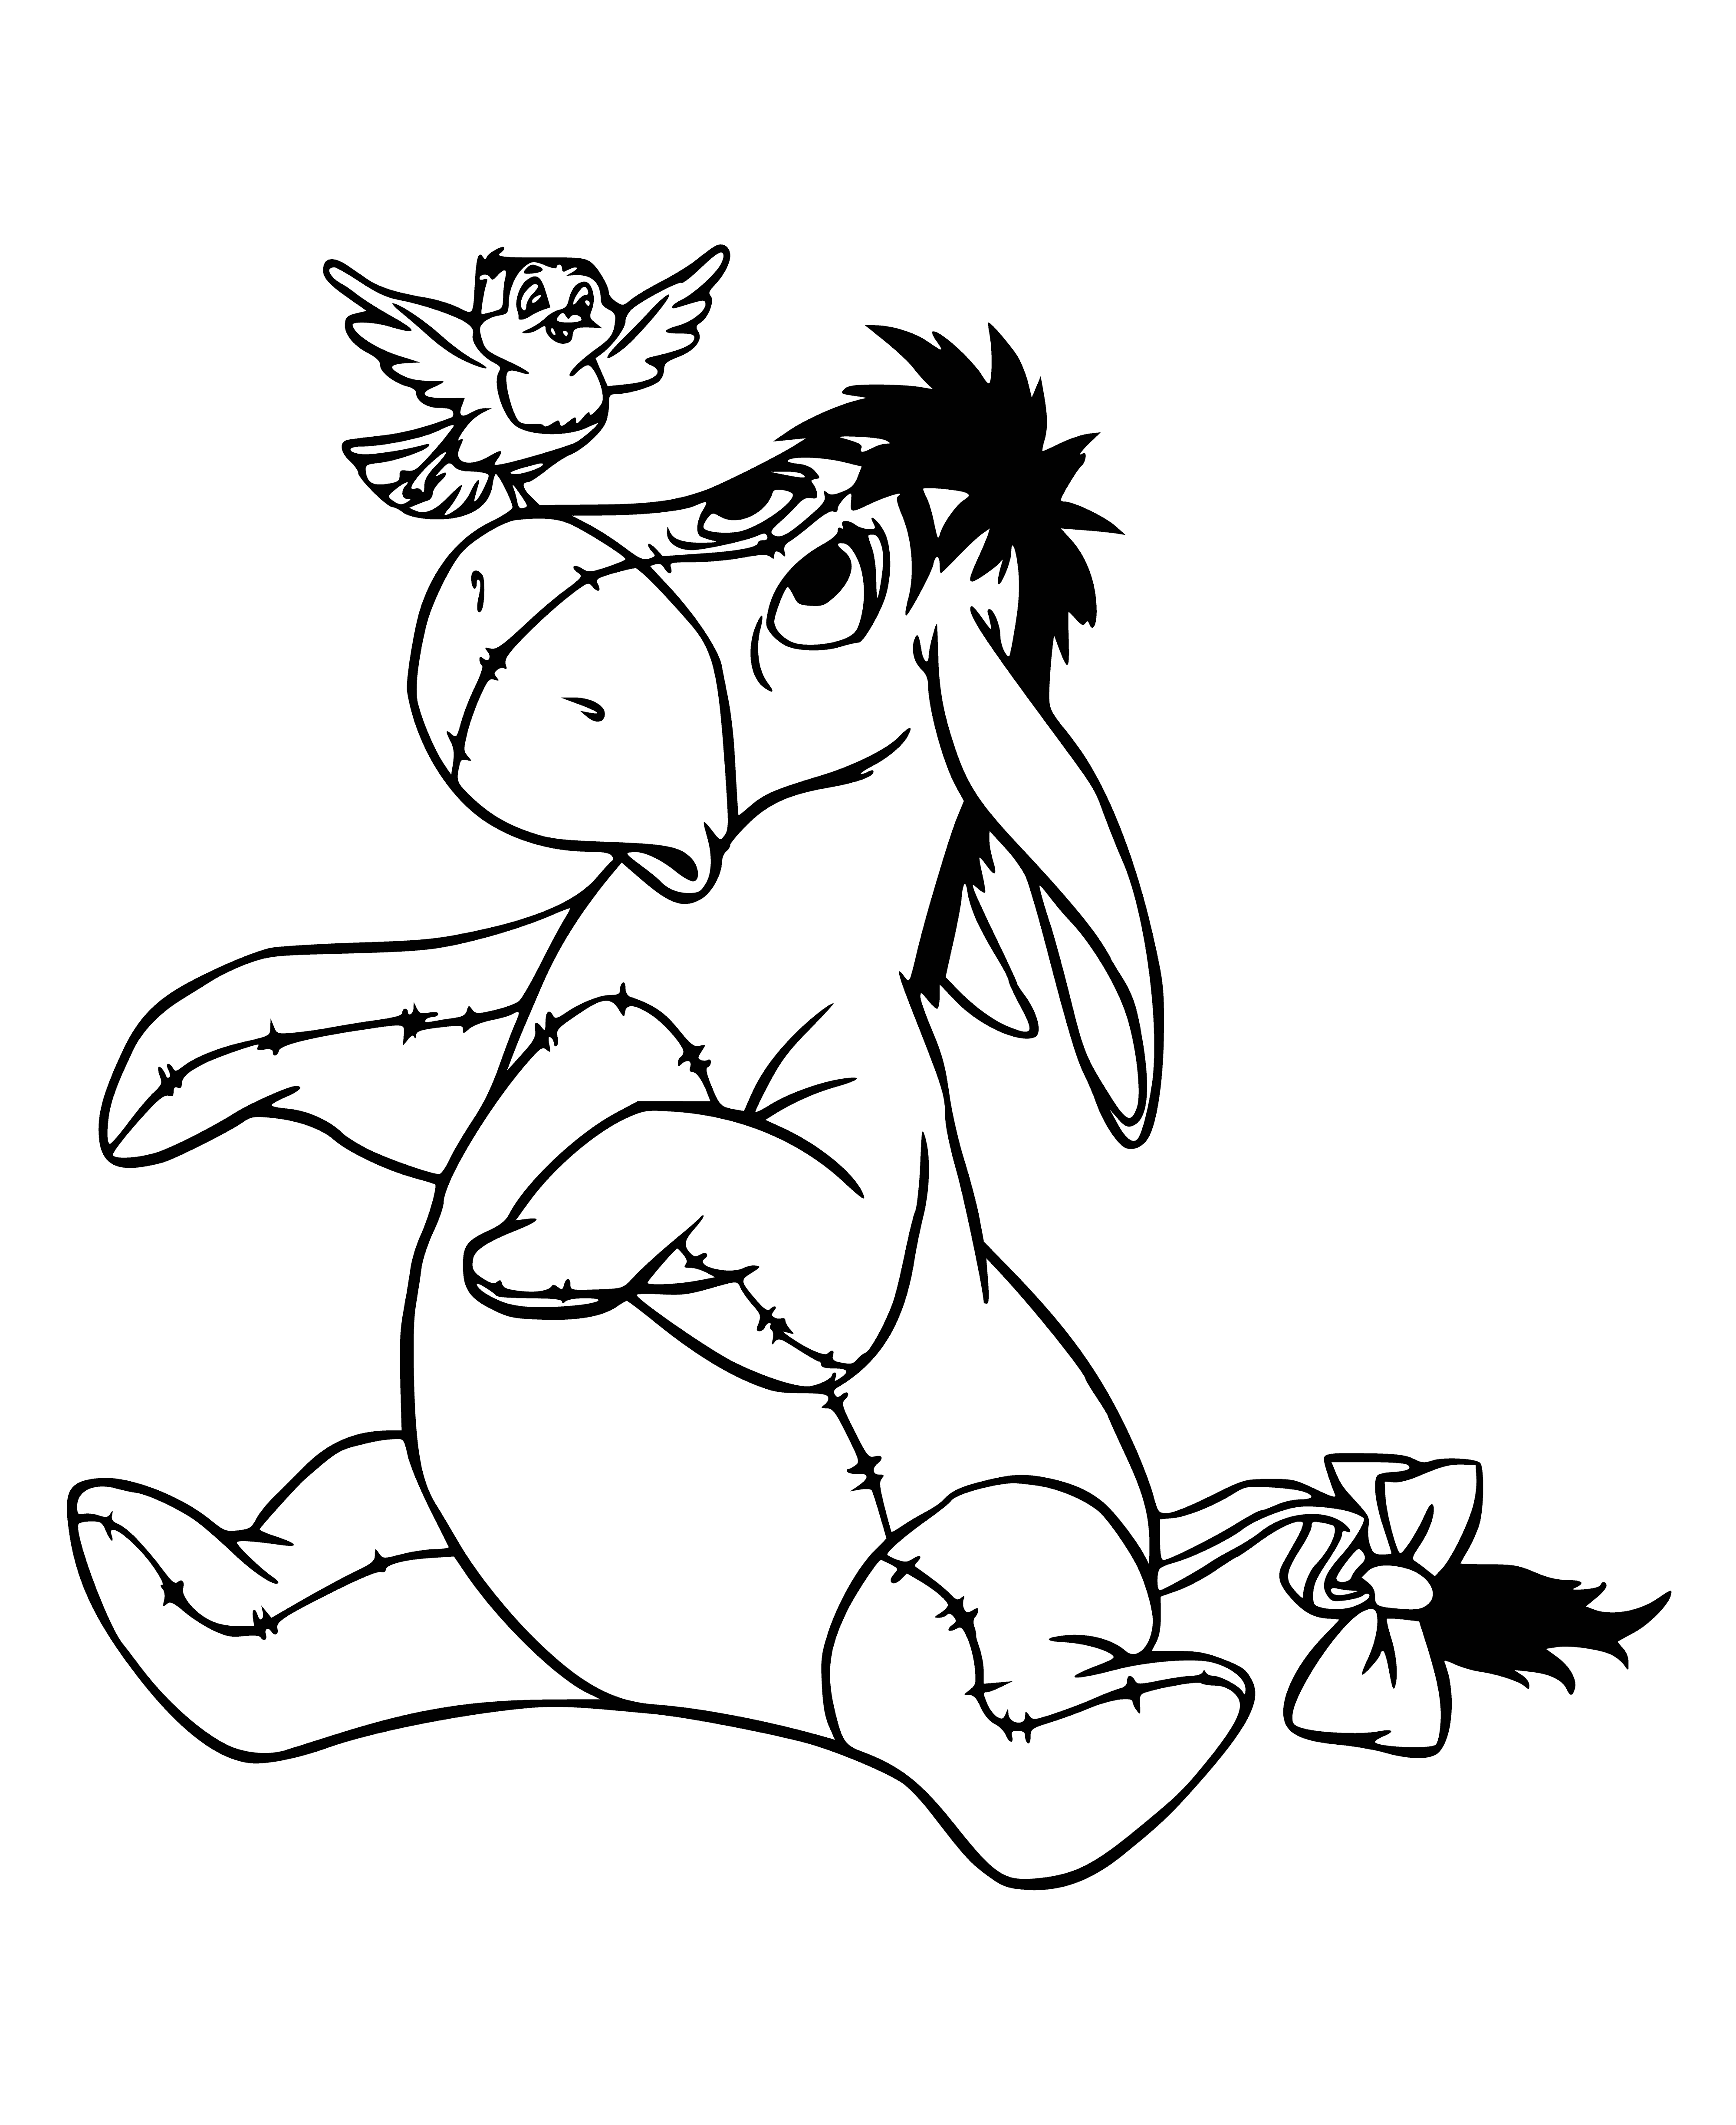 coloring page: Eeyore is lying on the ground, sad, with a sympathetic bird on his stomach.